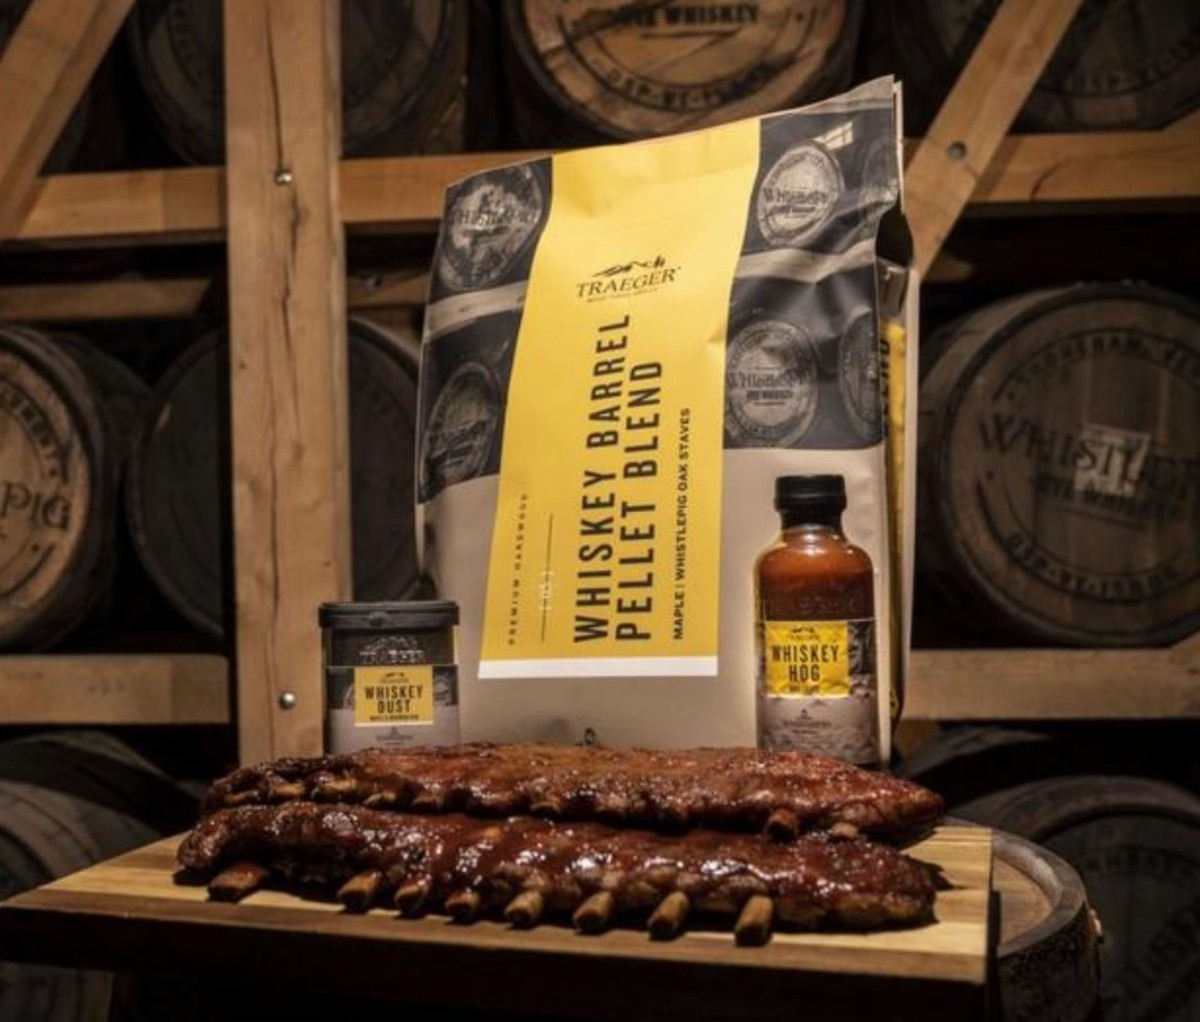 Set yourself up for some awesome fall grilling and sipping with the WhistlePig x Traeger collab.